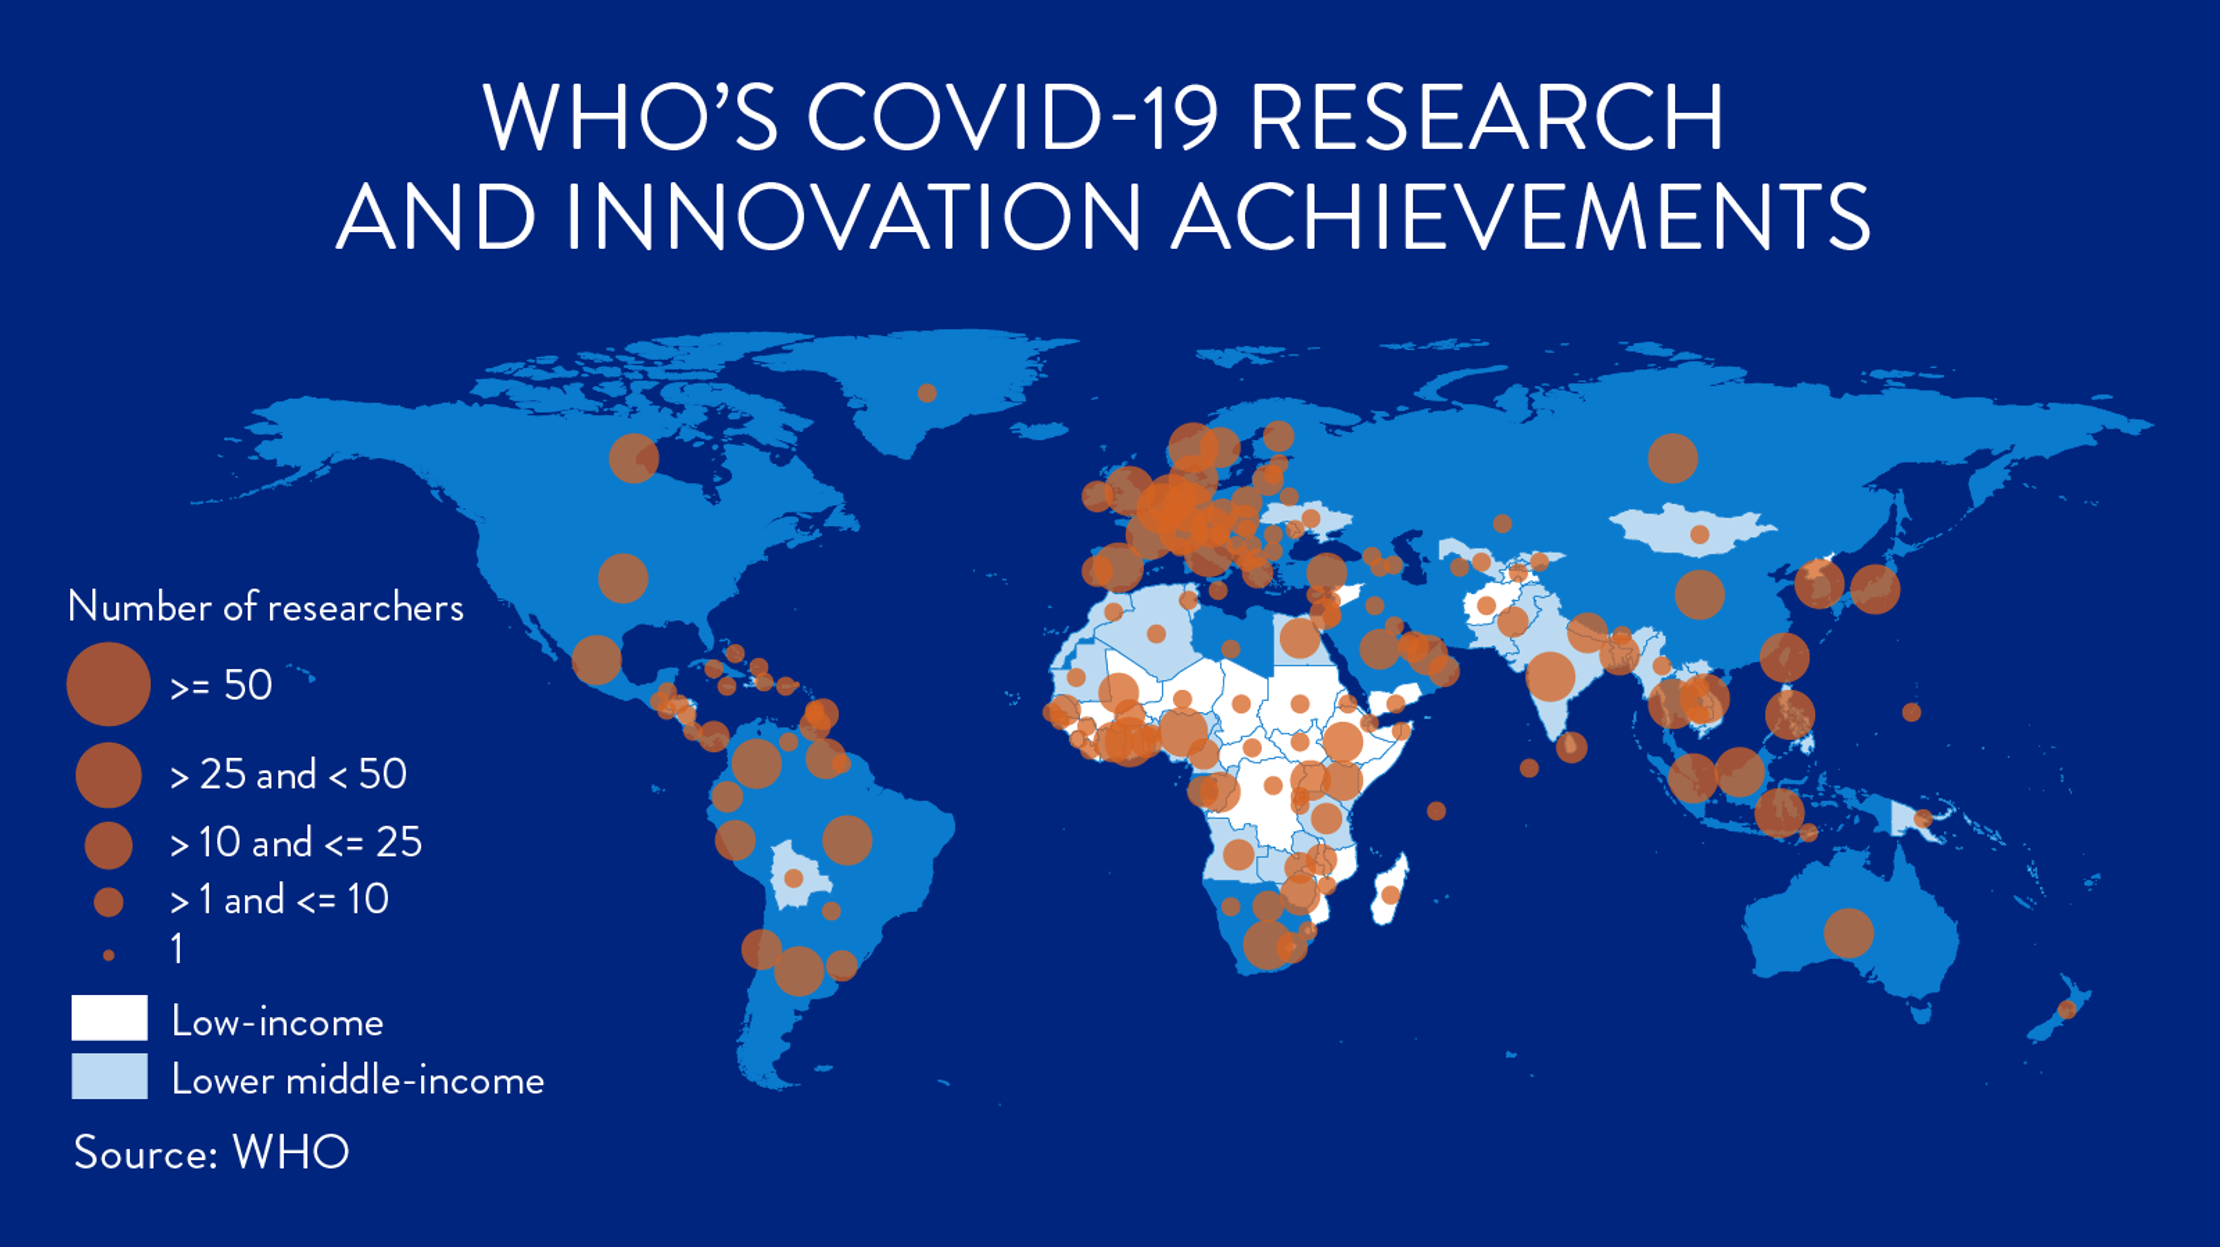 A bubble map of COVID-19 vaccine researchers around the world where the size of the bubble reflects the number of researchers. It shows research is happening in almost every country around the world.